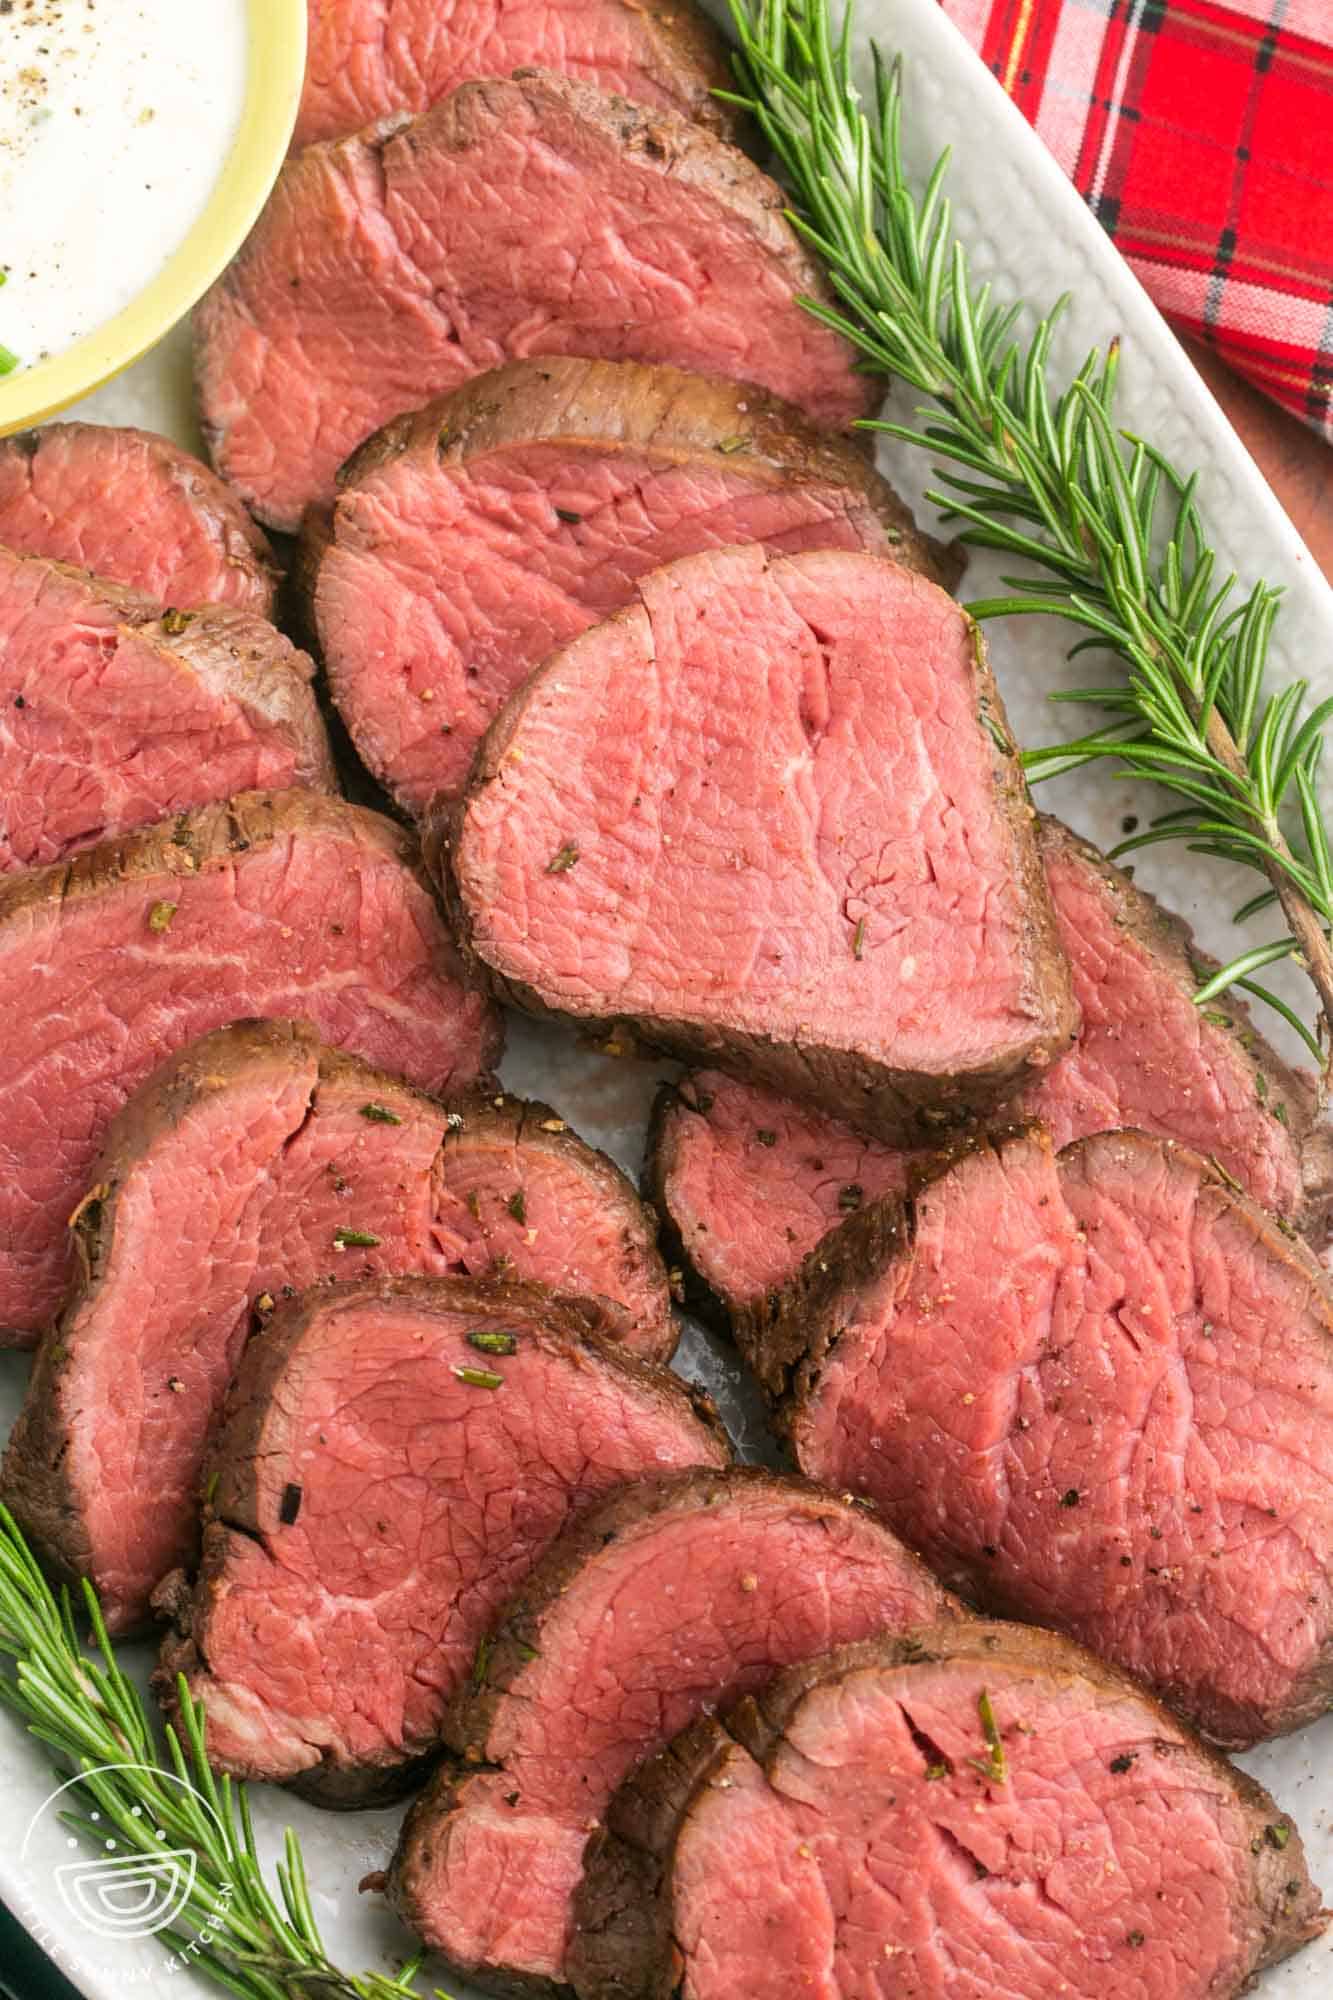 Sliced perfectly rosy beef tenderloin on an oval platter with rosemary sprigs on the sides.